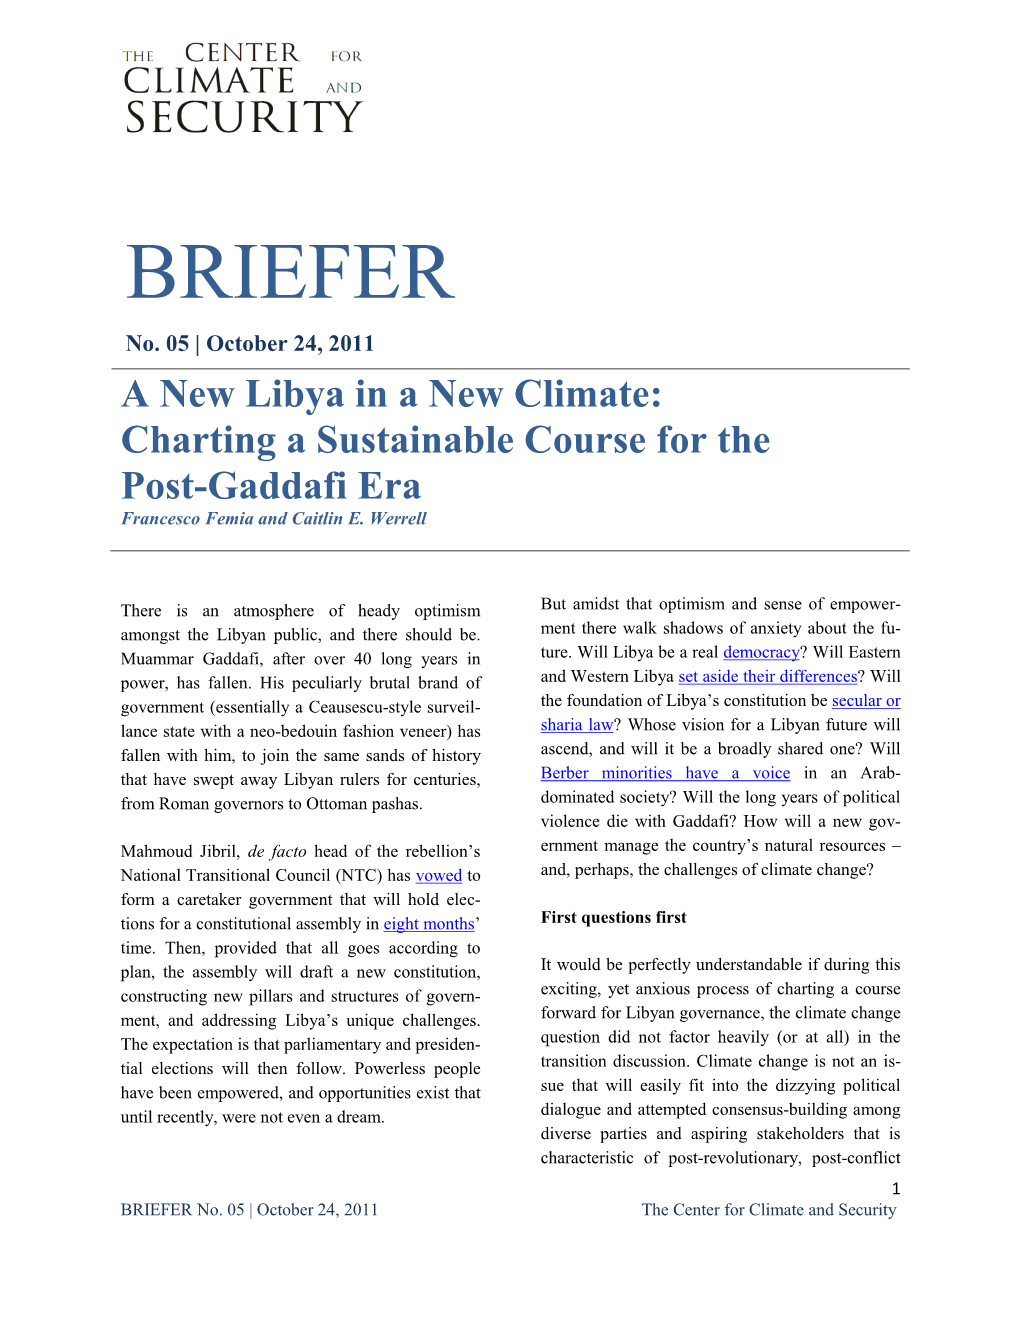 A New Libya in a New Climate: Charting a Sustainable Course for the Post-Gaddafi Era Francesco Femia and Caitlin E